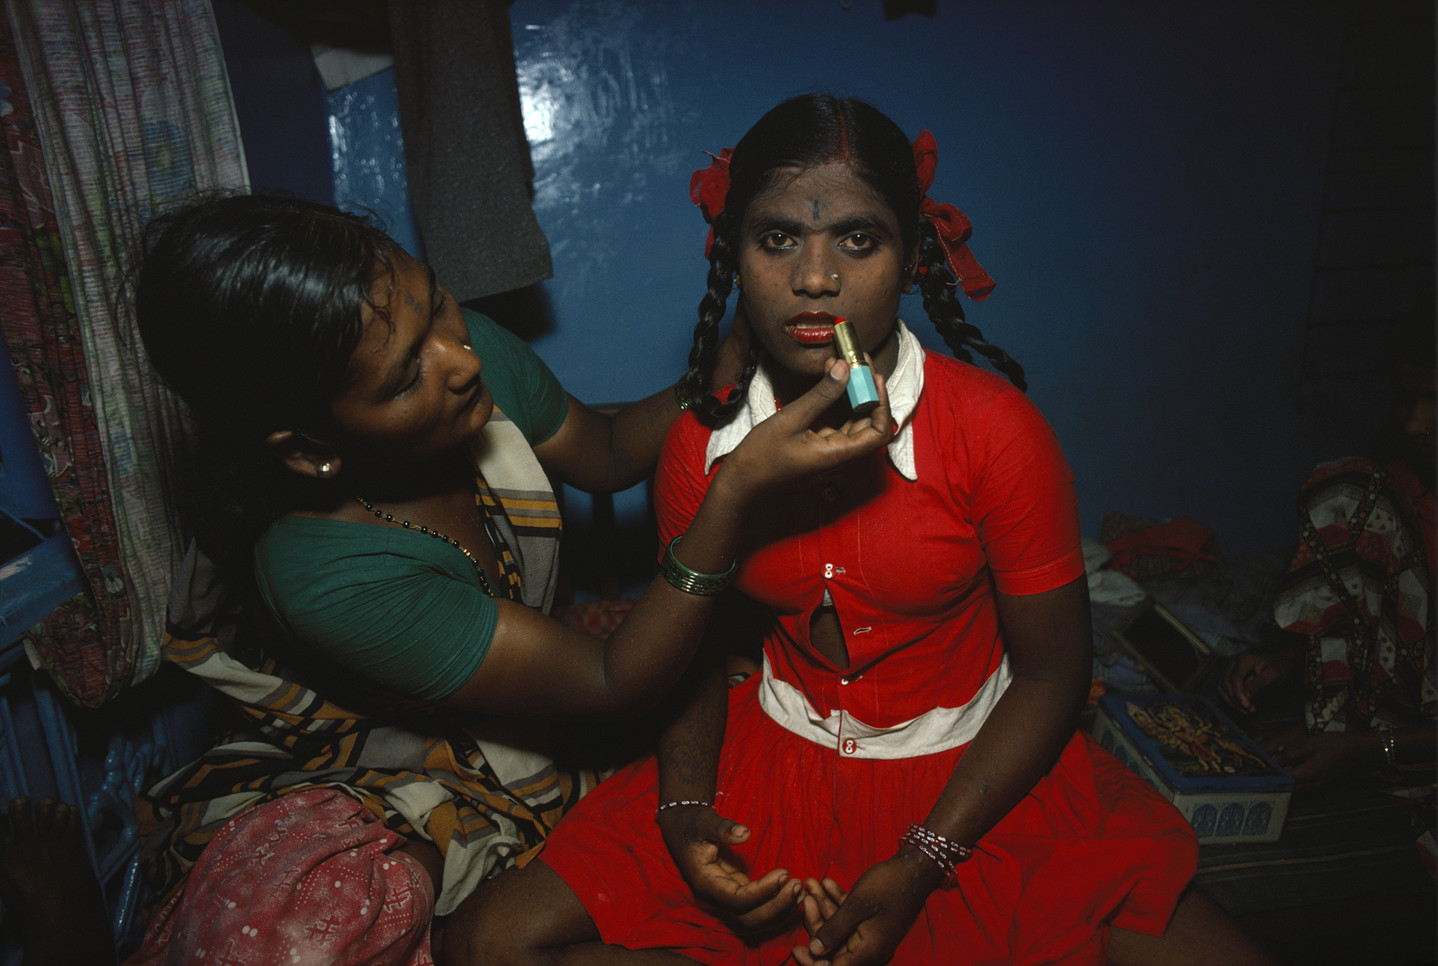 A color photograph of a teenage girl sitting down next to another woman, who applies lipstick to the girl’s lips. The teenage girl has dark skin and dark hair, which is styled into braided pigtails. She wears a bright red dress with a white collar. One button in the middle of her dress is open, revealing a small amount of her abdomen. She stares directly into the camera with a blank expression.